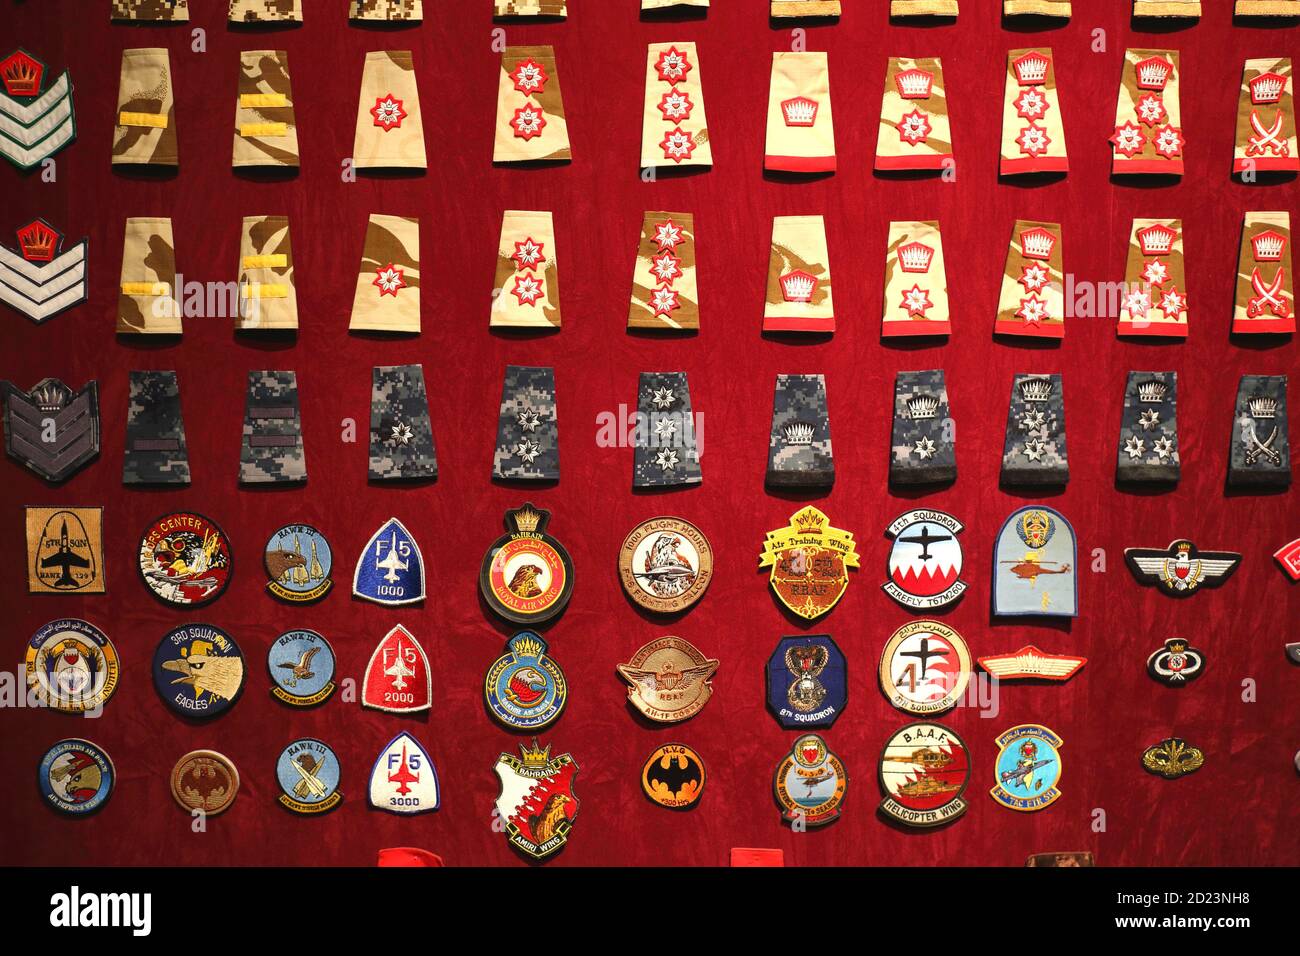 Rank and other military insignia on display at the Military Museum, Riffaa, Kingdom of Bahrain Stock Photo